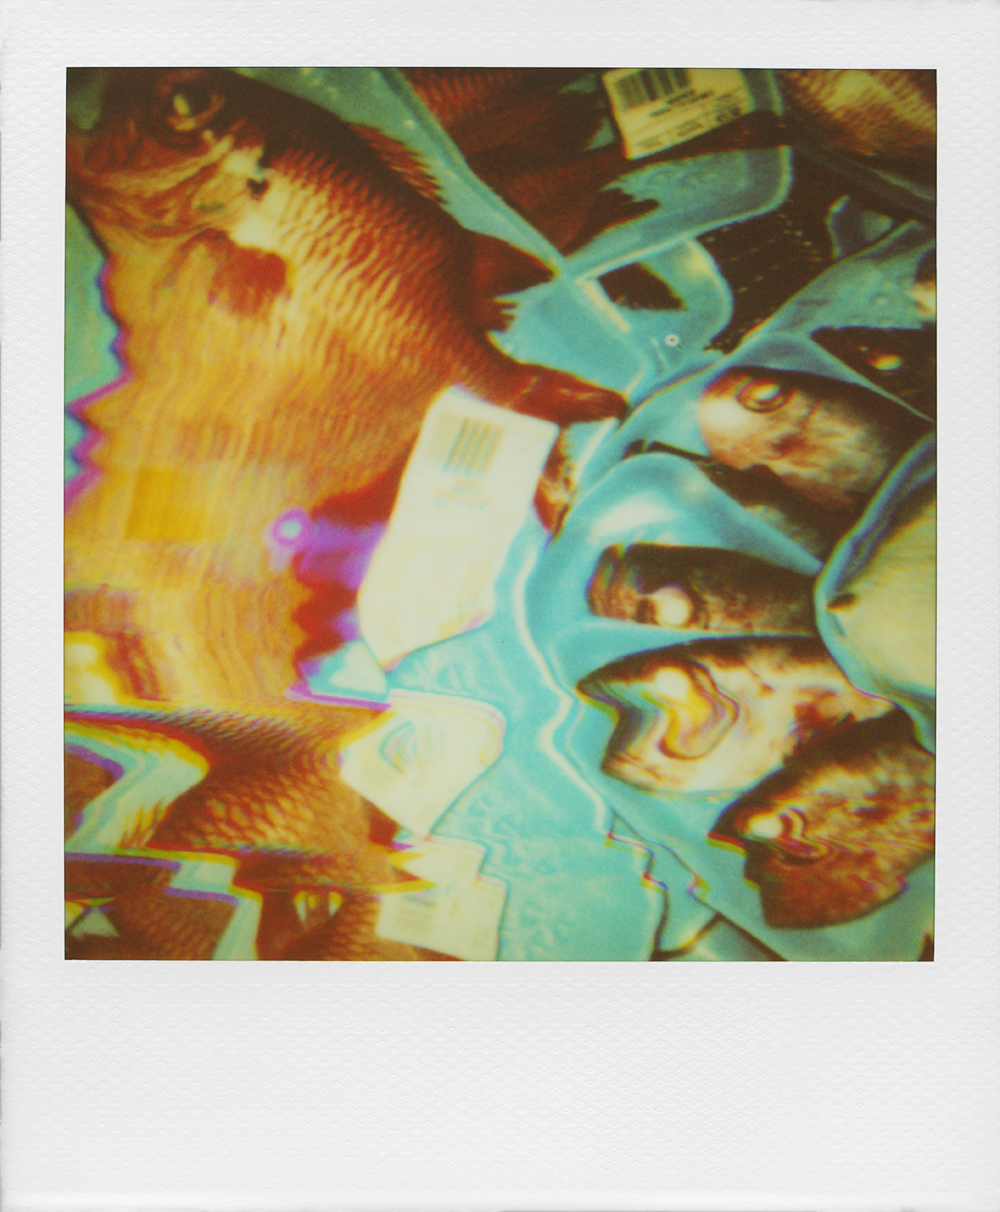 A polaroid photograph of multiple items of packaged fish, each item blurring into one another due to the exposure of the film. The fish are gray and the packages they come in are turquoise. 